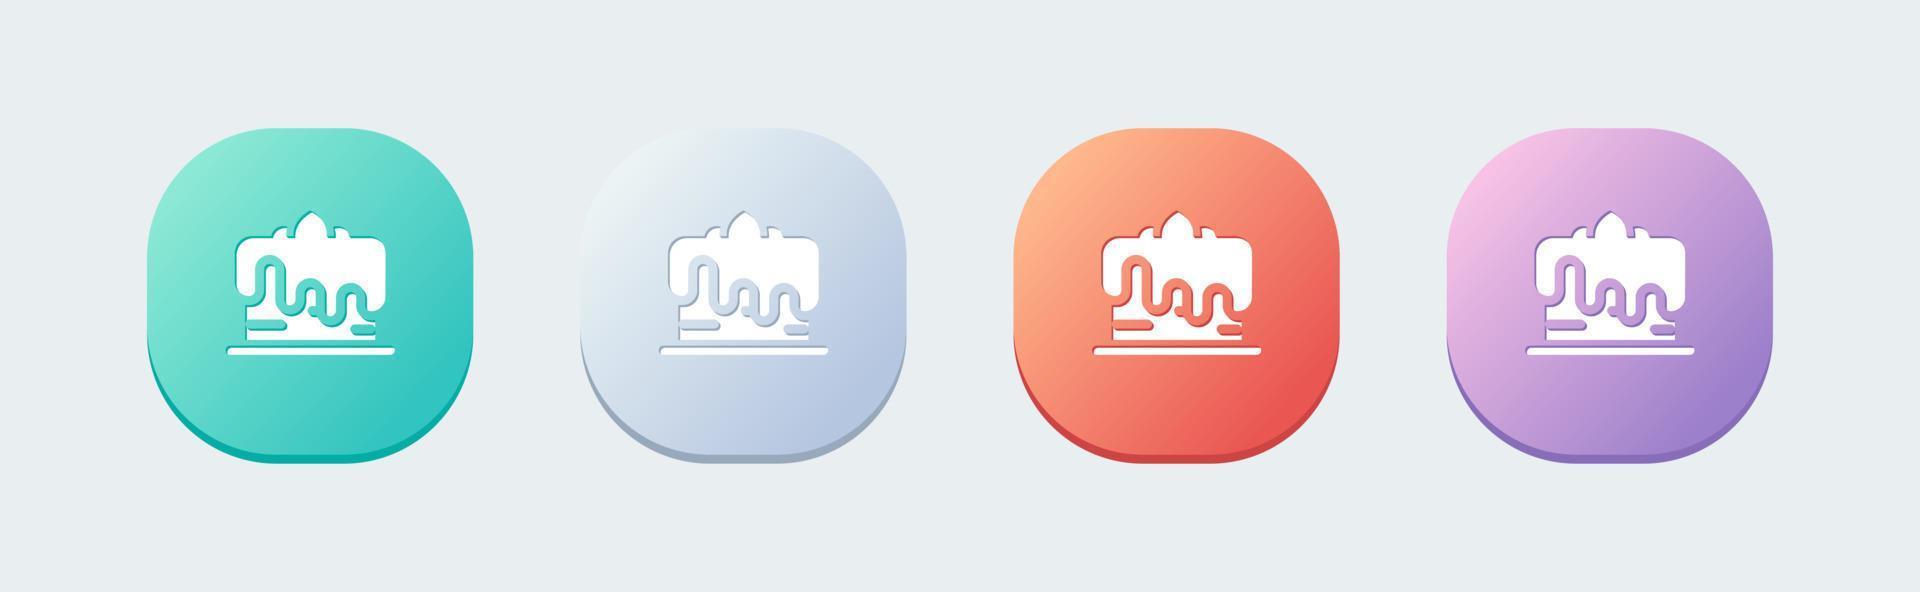 Cake solid icon in flat design style. Celebration signs vector illustration.